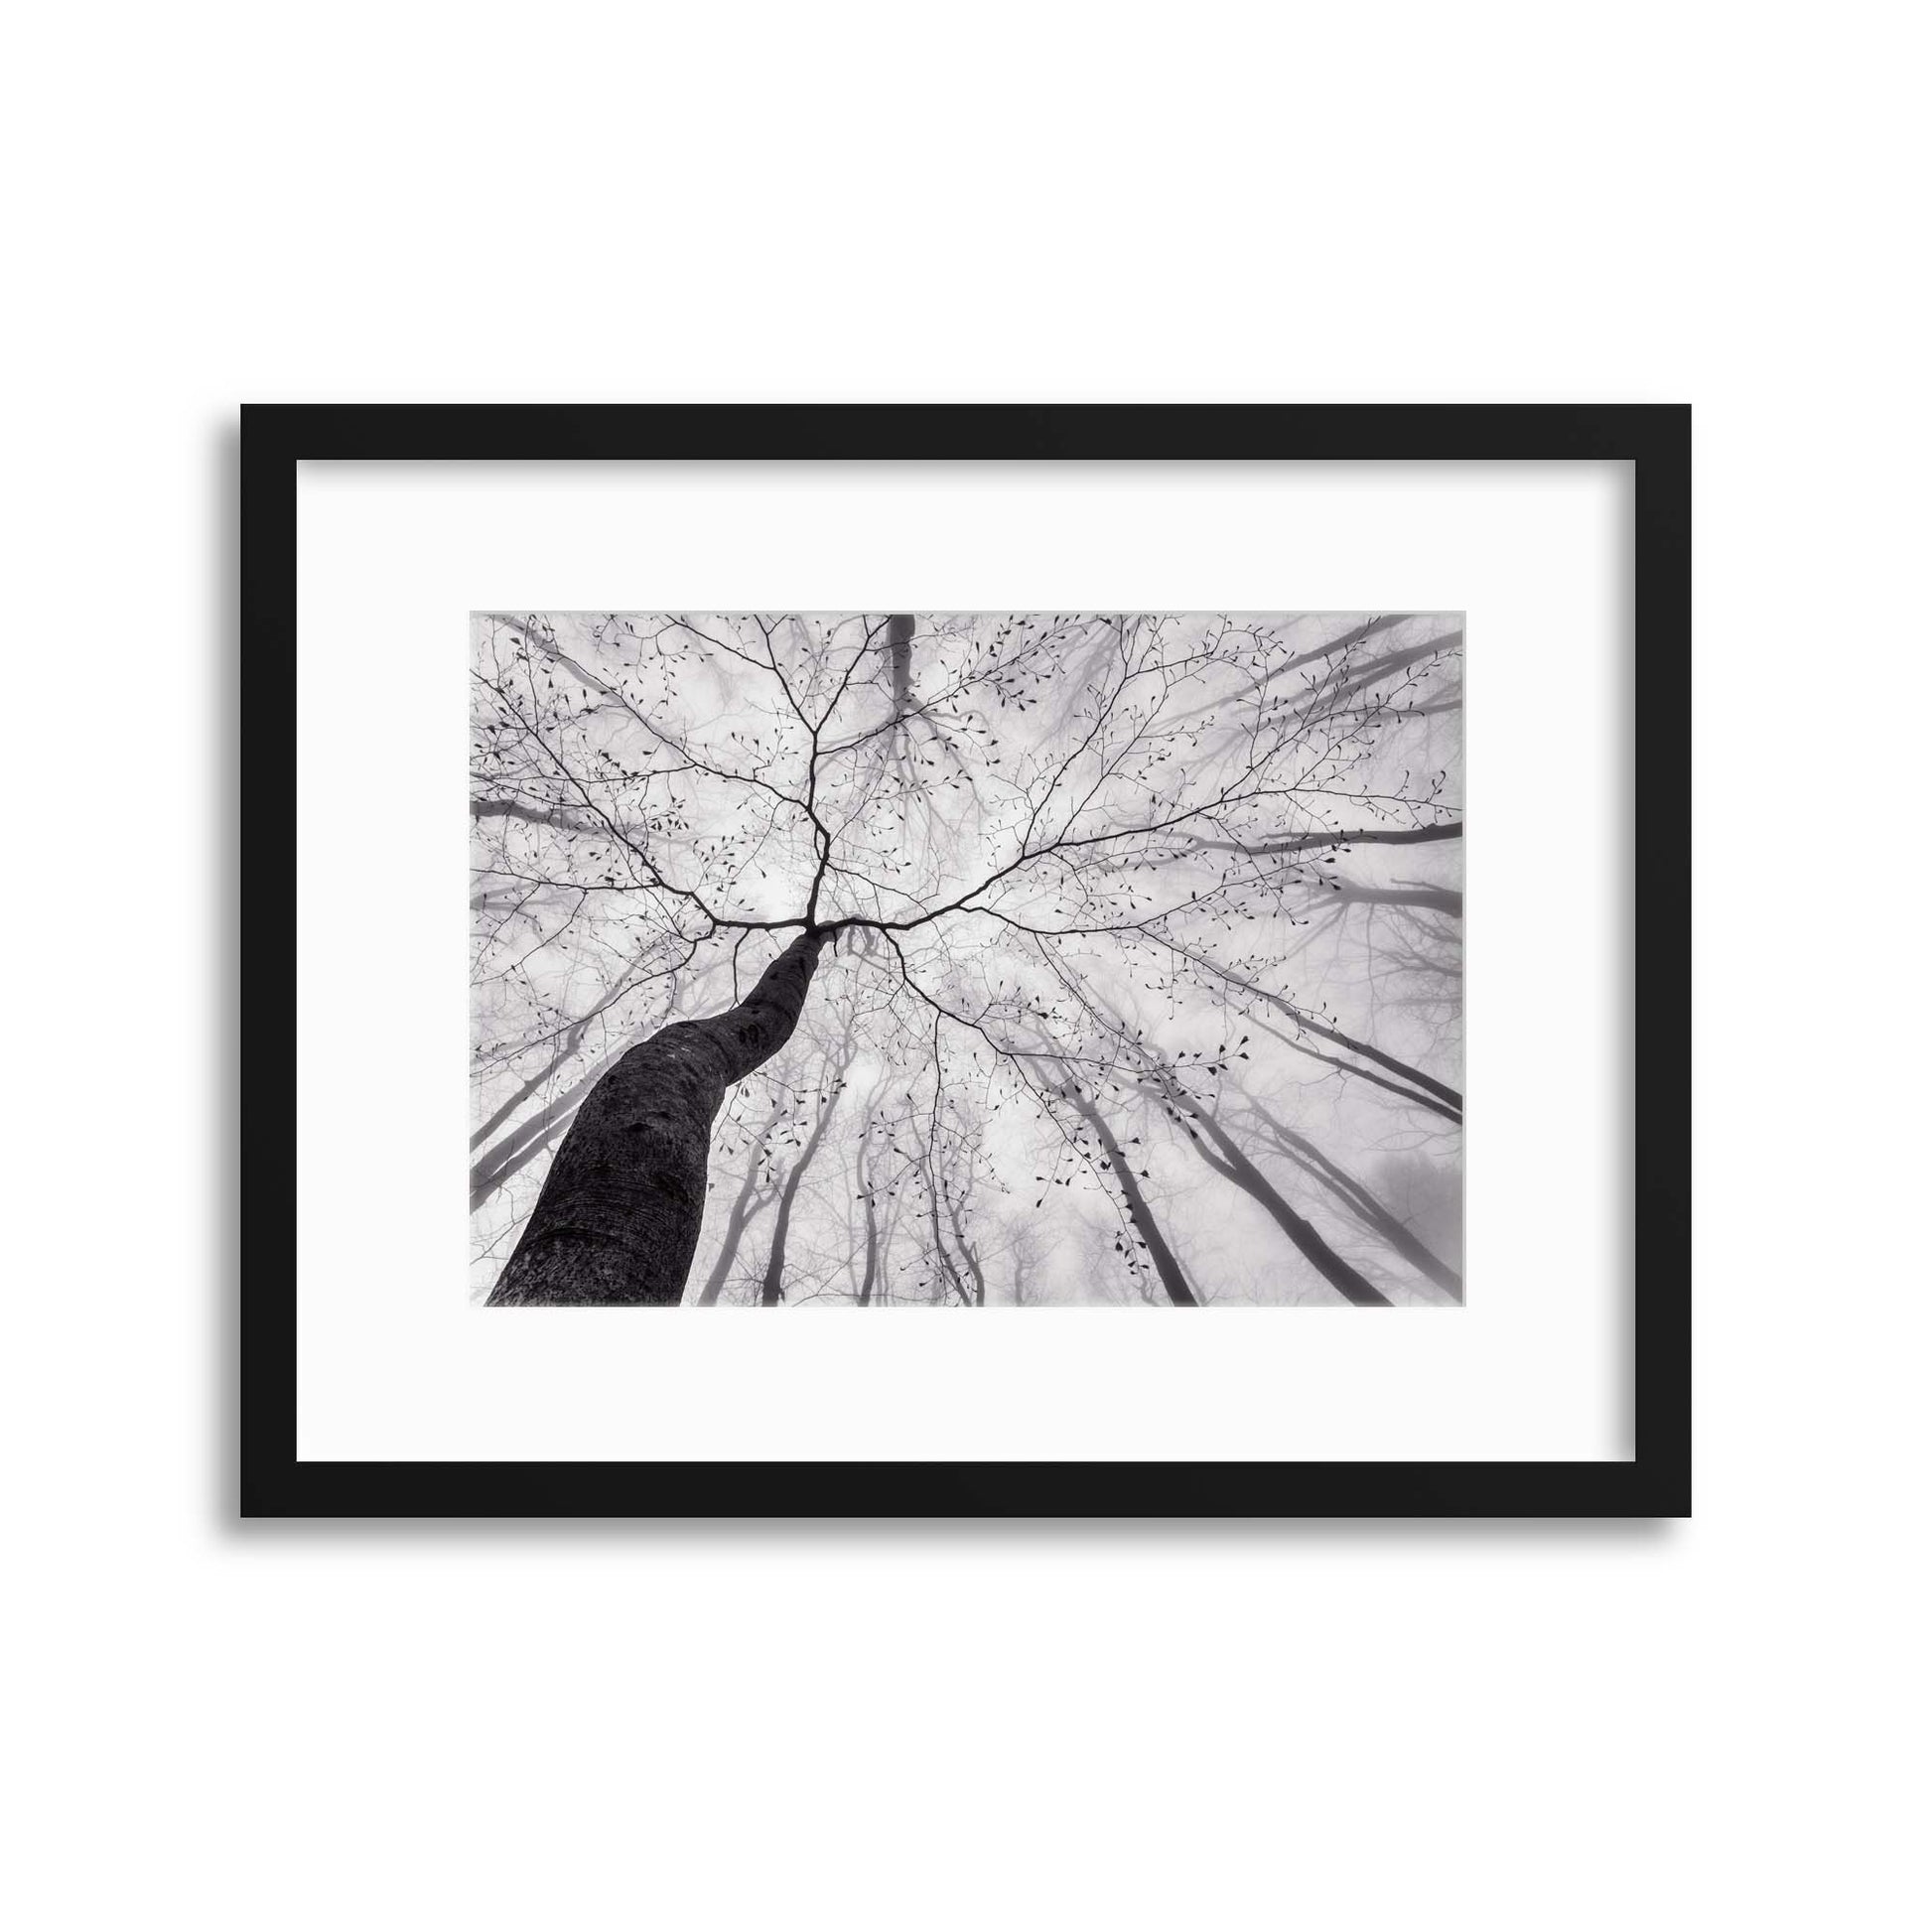 A View of the Tree Crown by Tom Pavlasek Framed Print - USTAD HOME